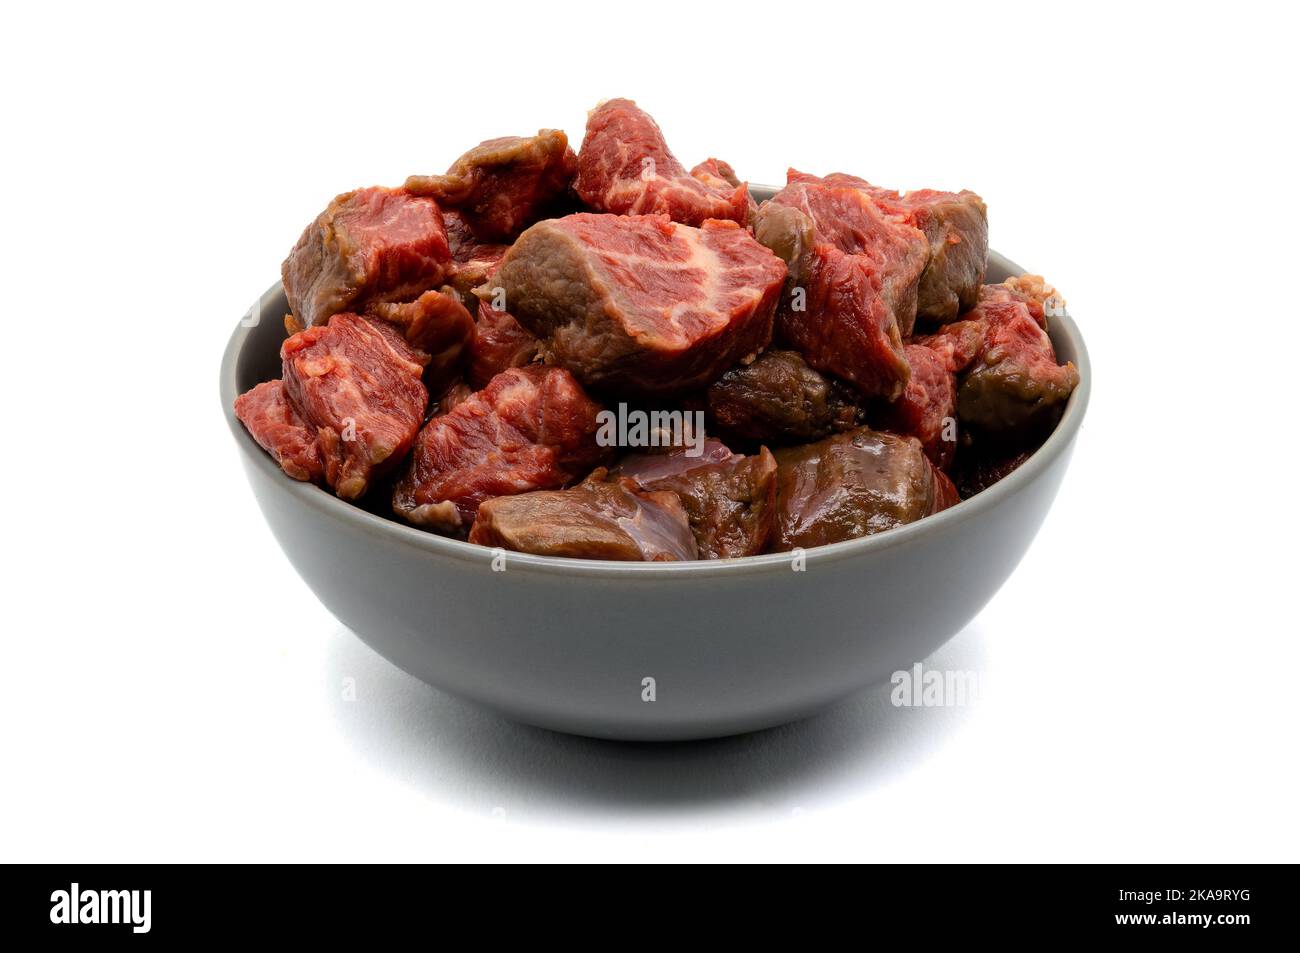 Bowl of raw diced red meat isolated on white background Stock Photo